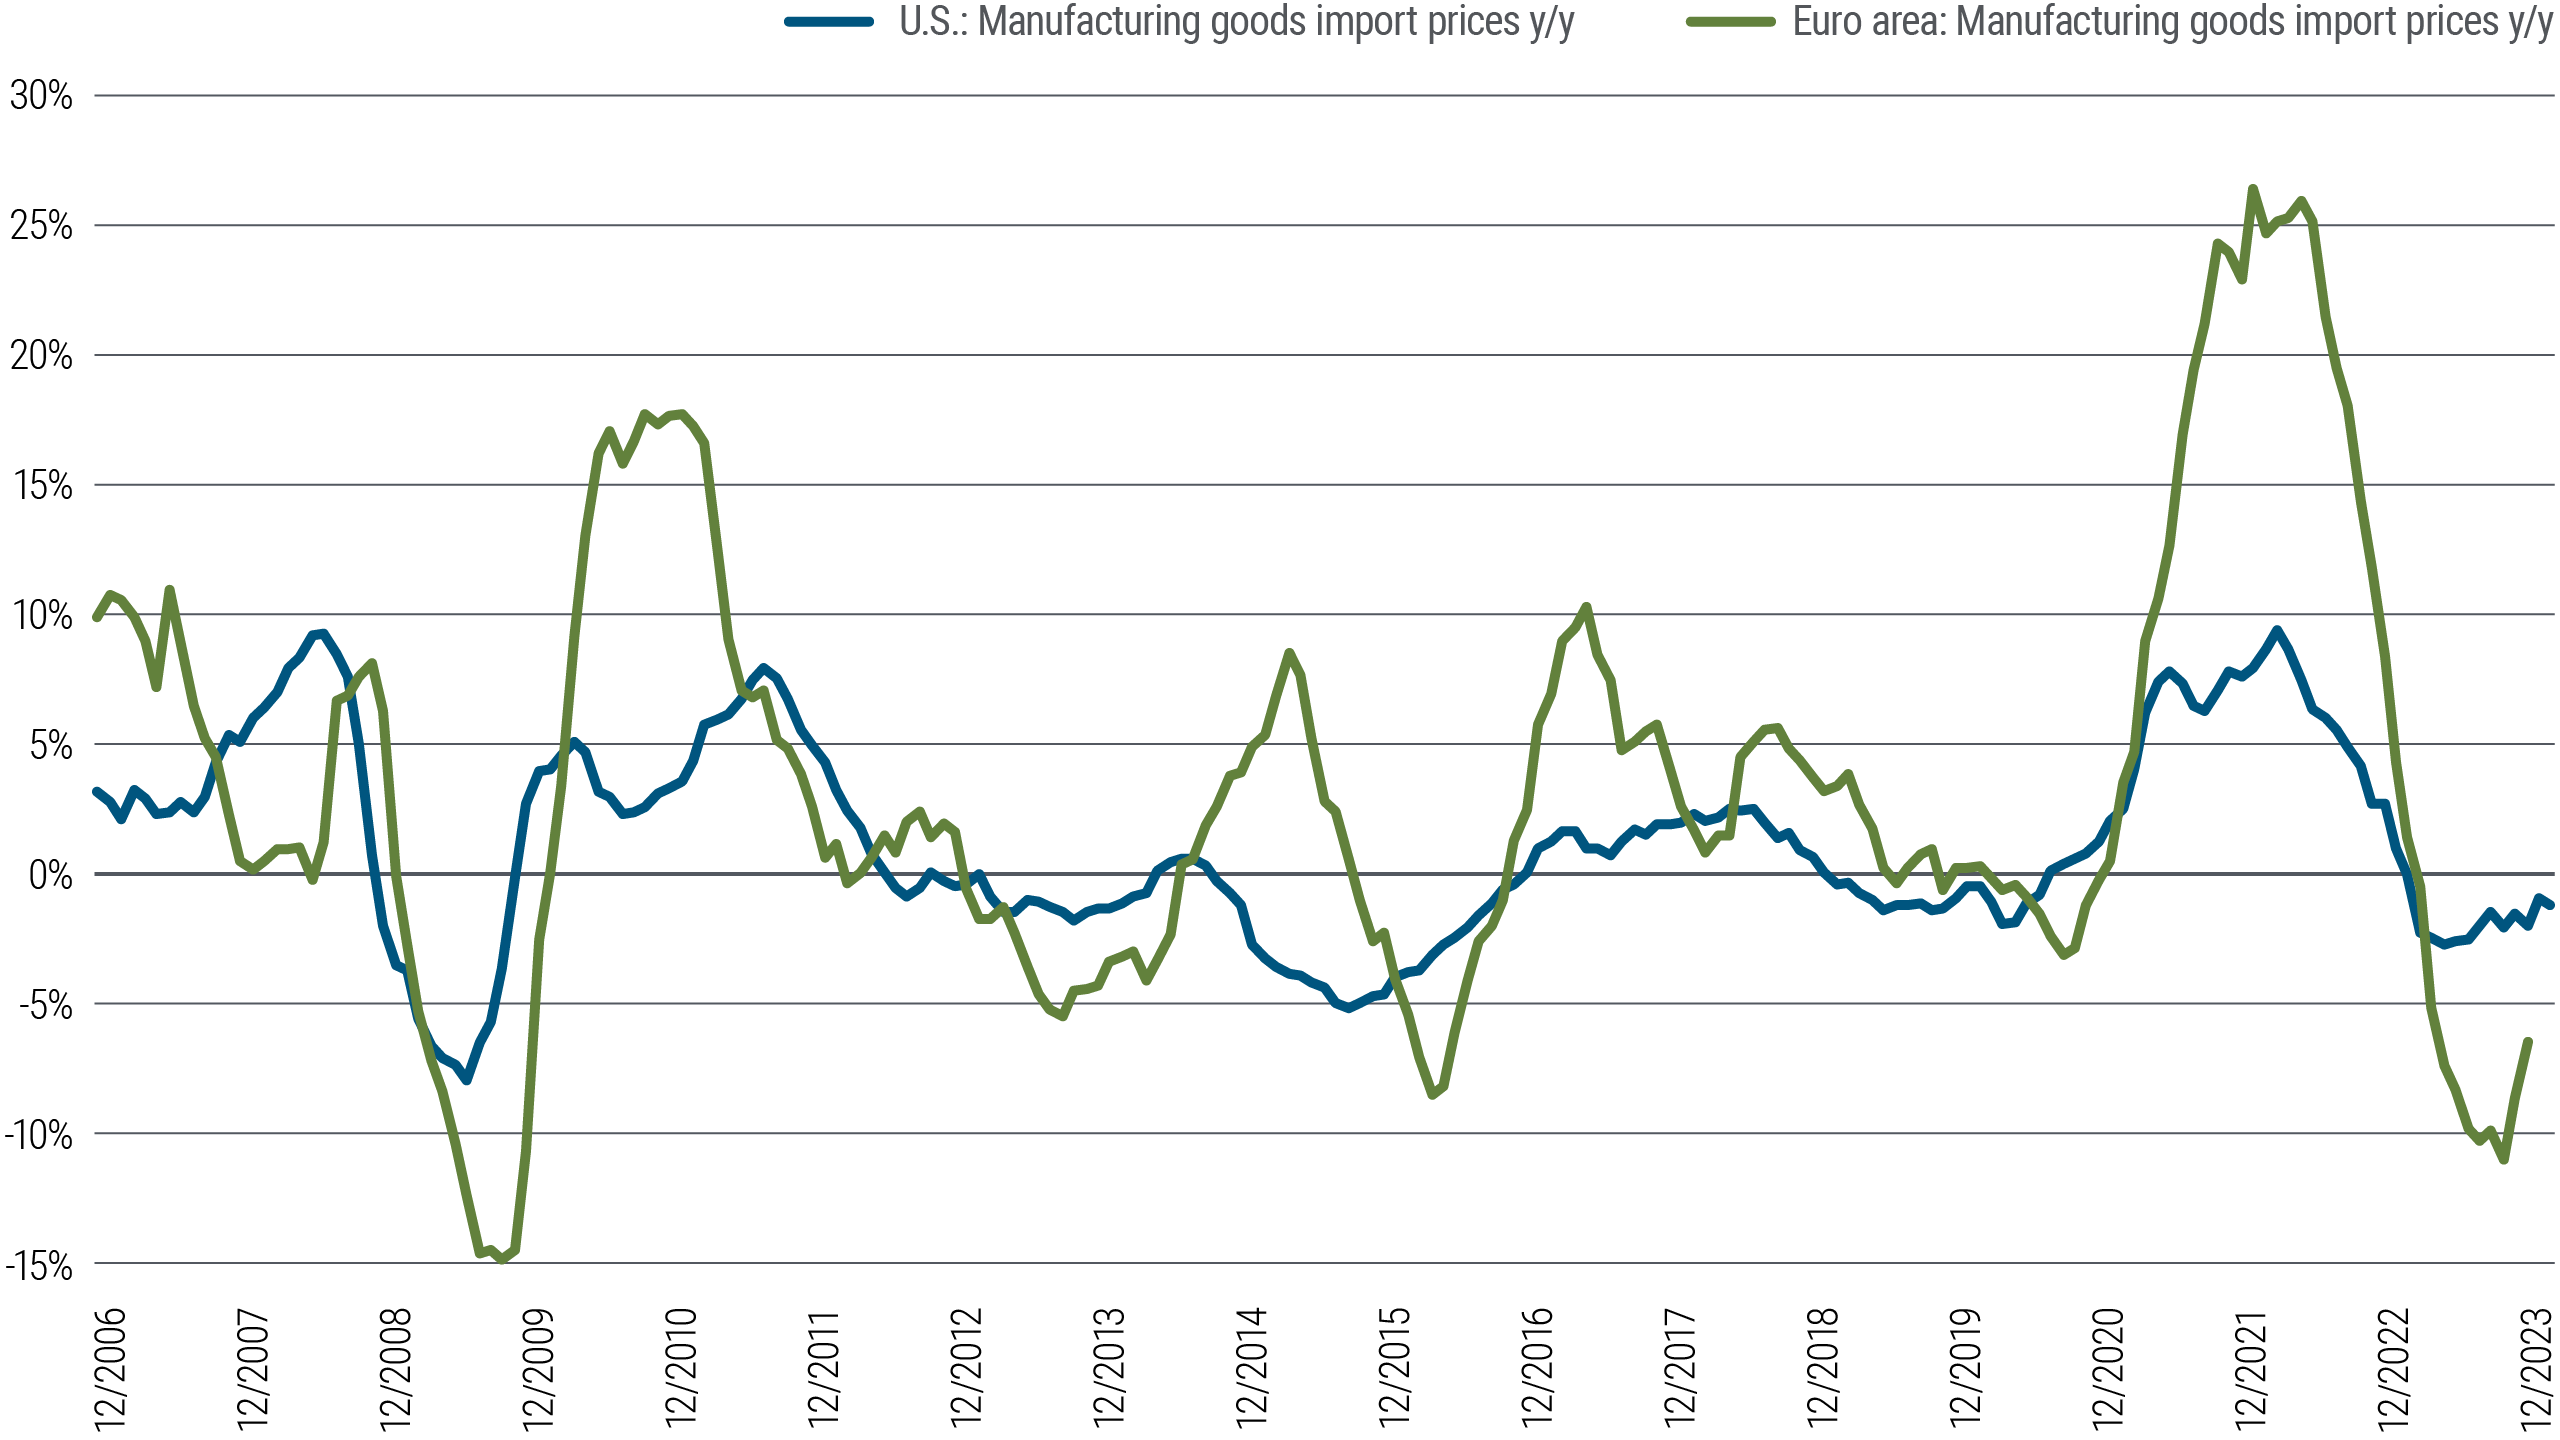 Figure 2 is a line chart comparing year-over-year percentage changes in overall import prices from manufacturing goods in the U.S. and Europe from December 2006 through March 2024. In that time frame, U.S. import price changes fluctuate between −7% and +9%, and euro area price changes follow a similar pattern but tend to fluctuate more widely, from −15% (following the global financial crisis) and a recent peak of +26% in 2022. As of March 2024, the year-over-year price changes were −2% in the U.S. and −7% in the euro area.